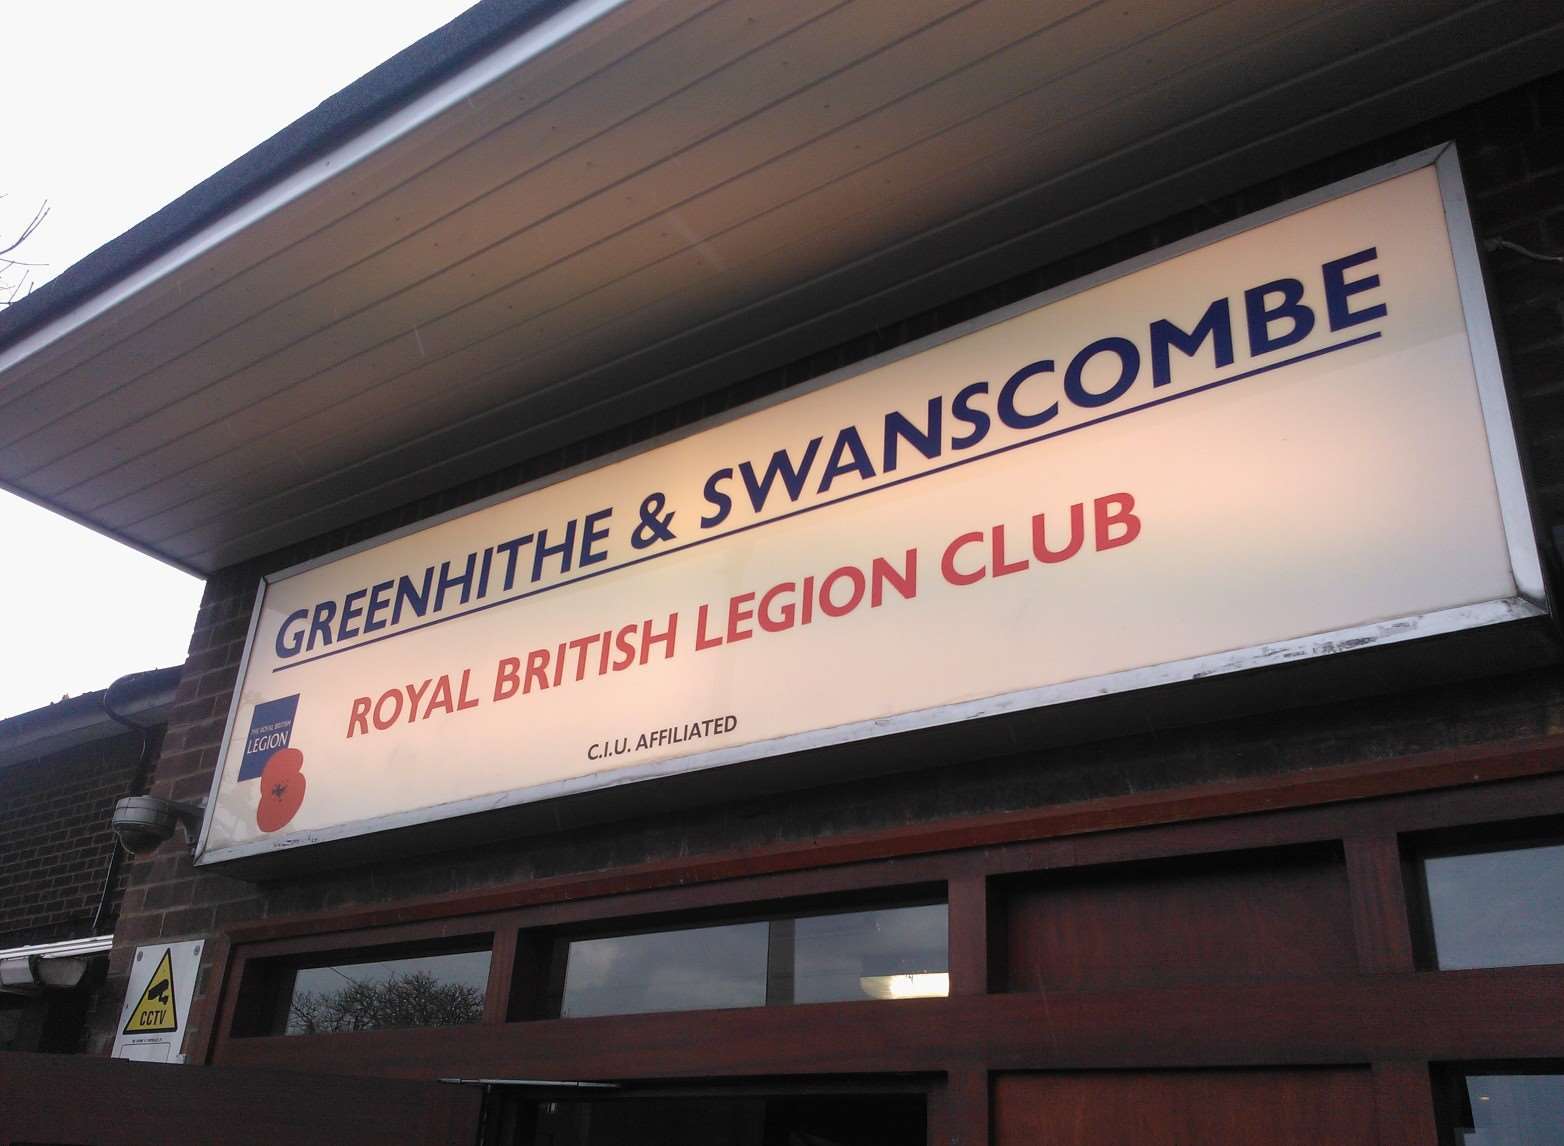 The Greenhithe & Swanscombe Royal British Legion Club